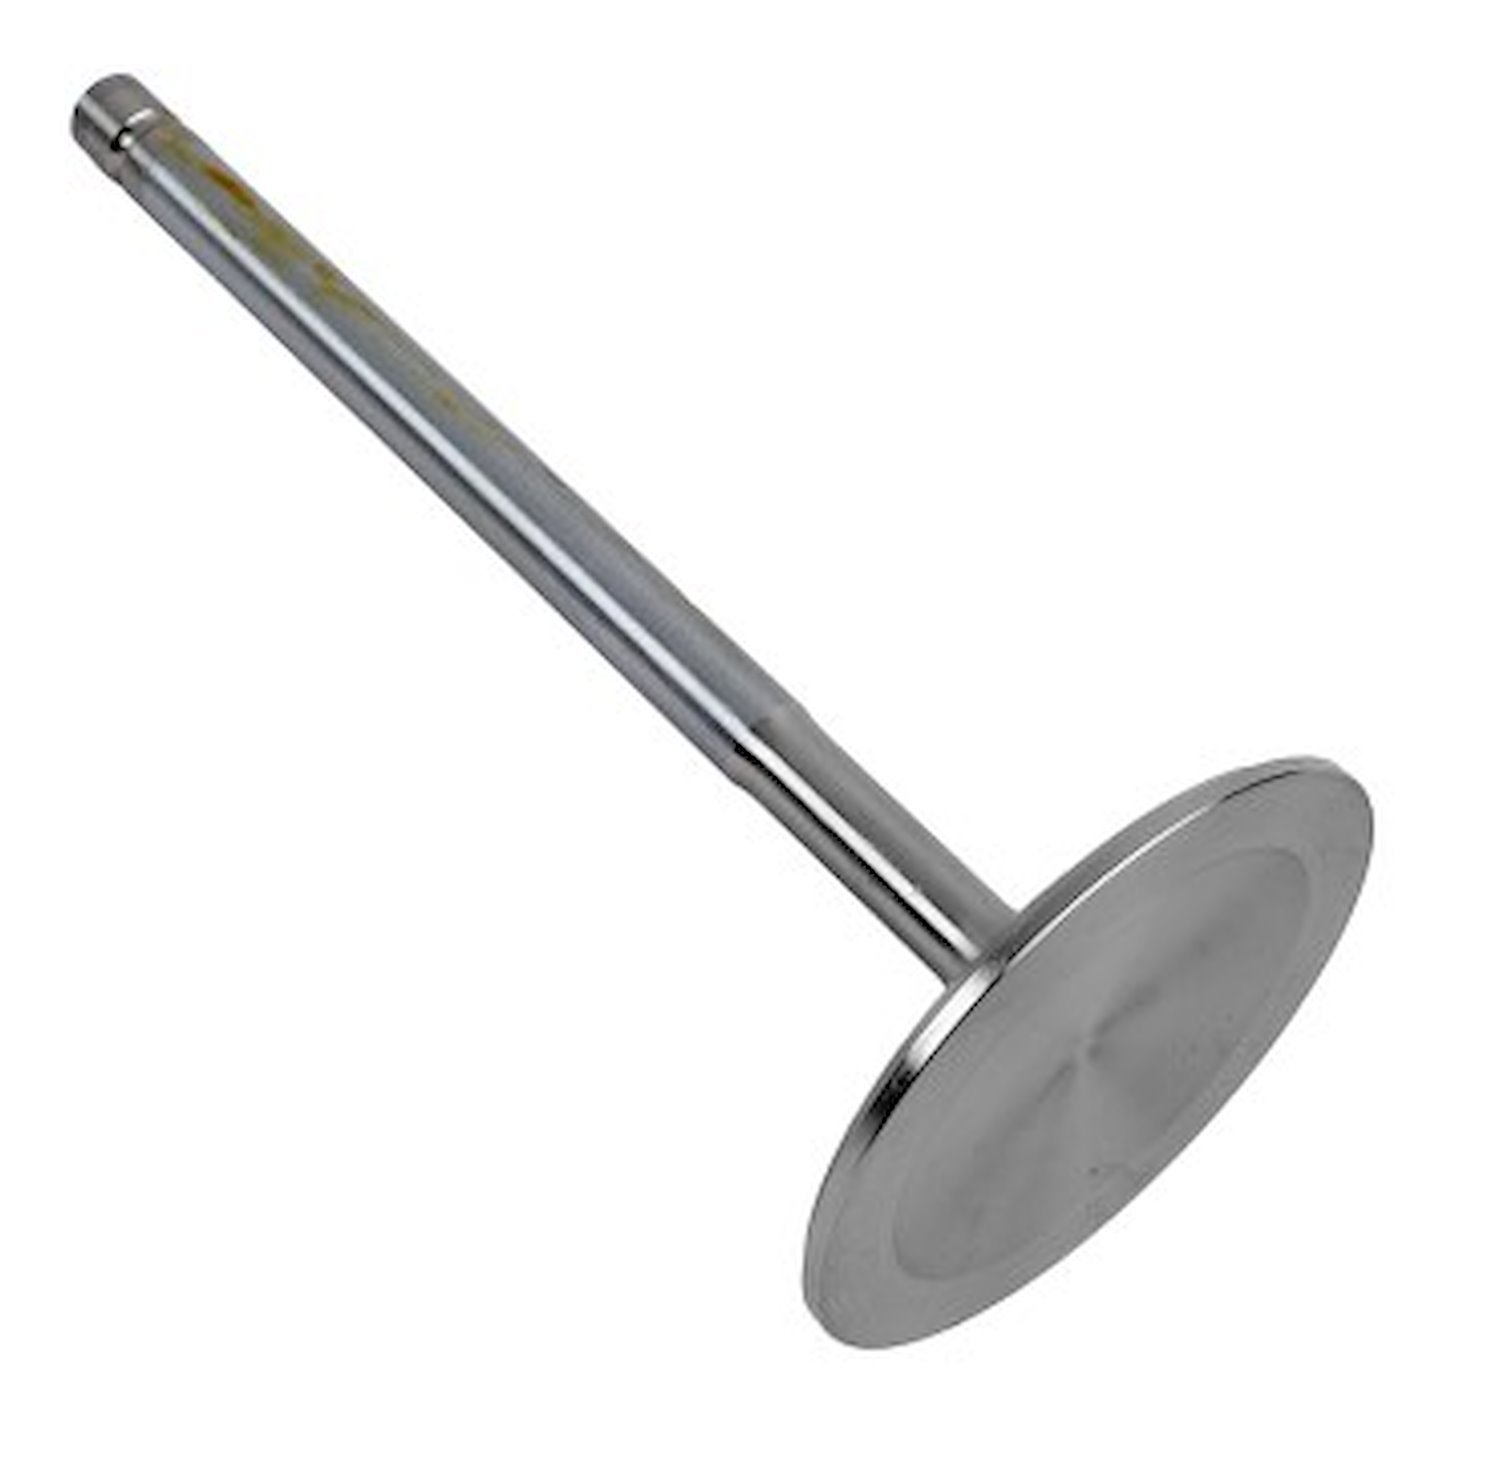 Stainless Steel 2.02 in. Intake Valve for Small